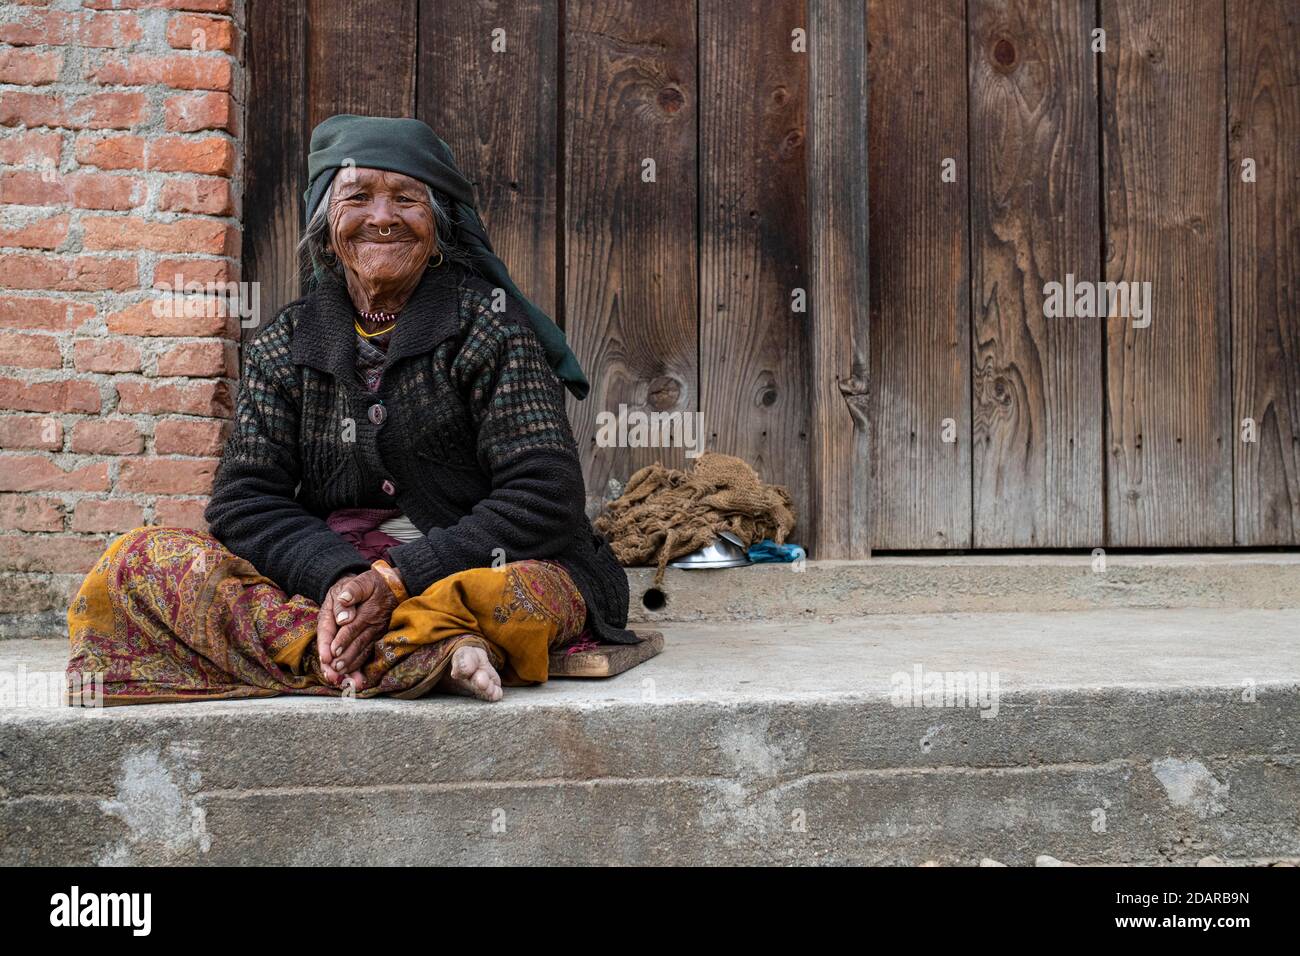 Friendly smiling elderly woman with headscarf and nose ring sitting in front of a wooden door, Himalaya, Jiri, Khumbu region, Nepal Stock Photo